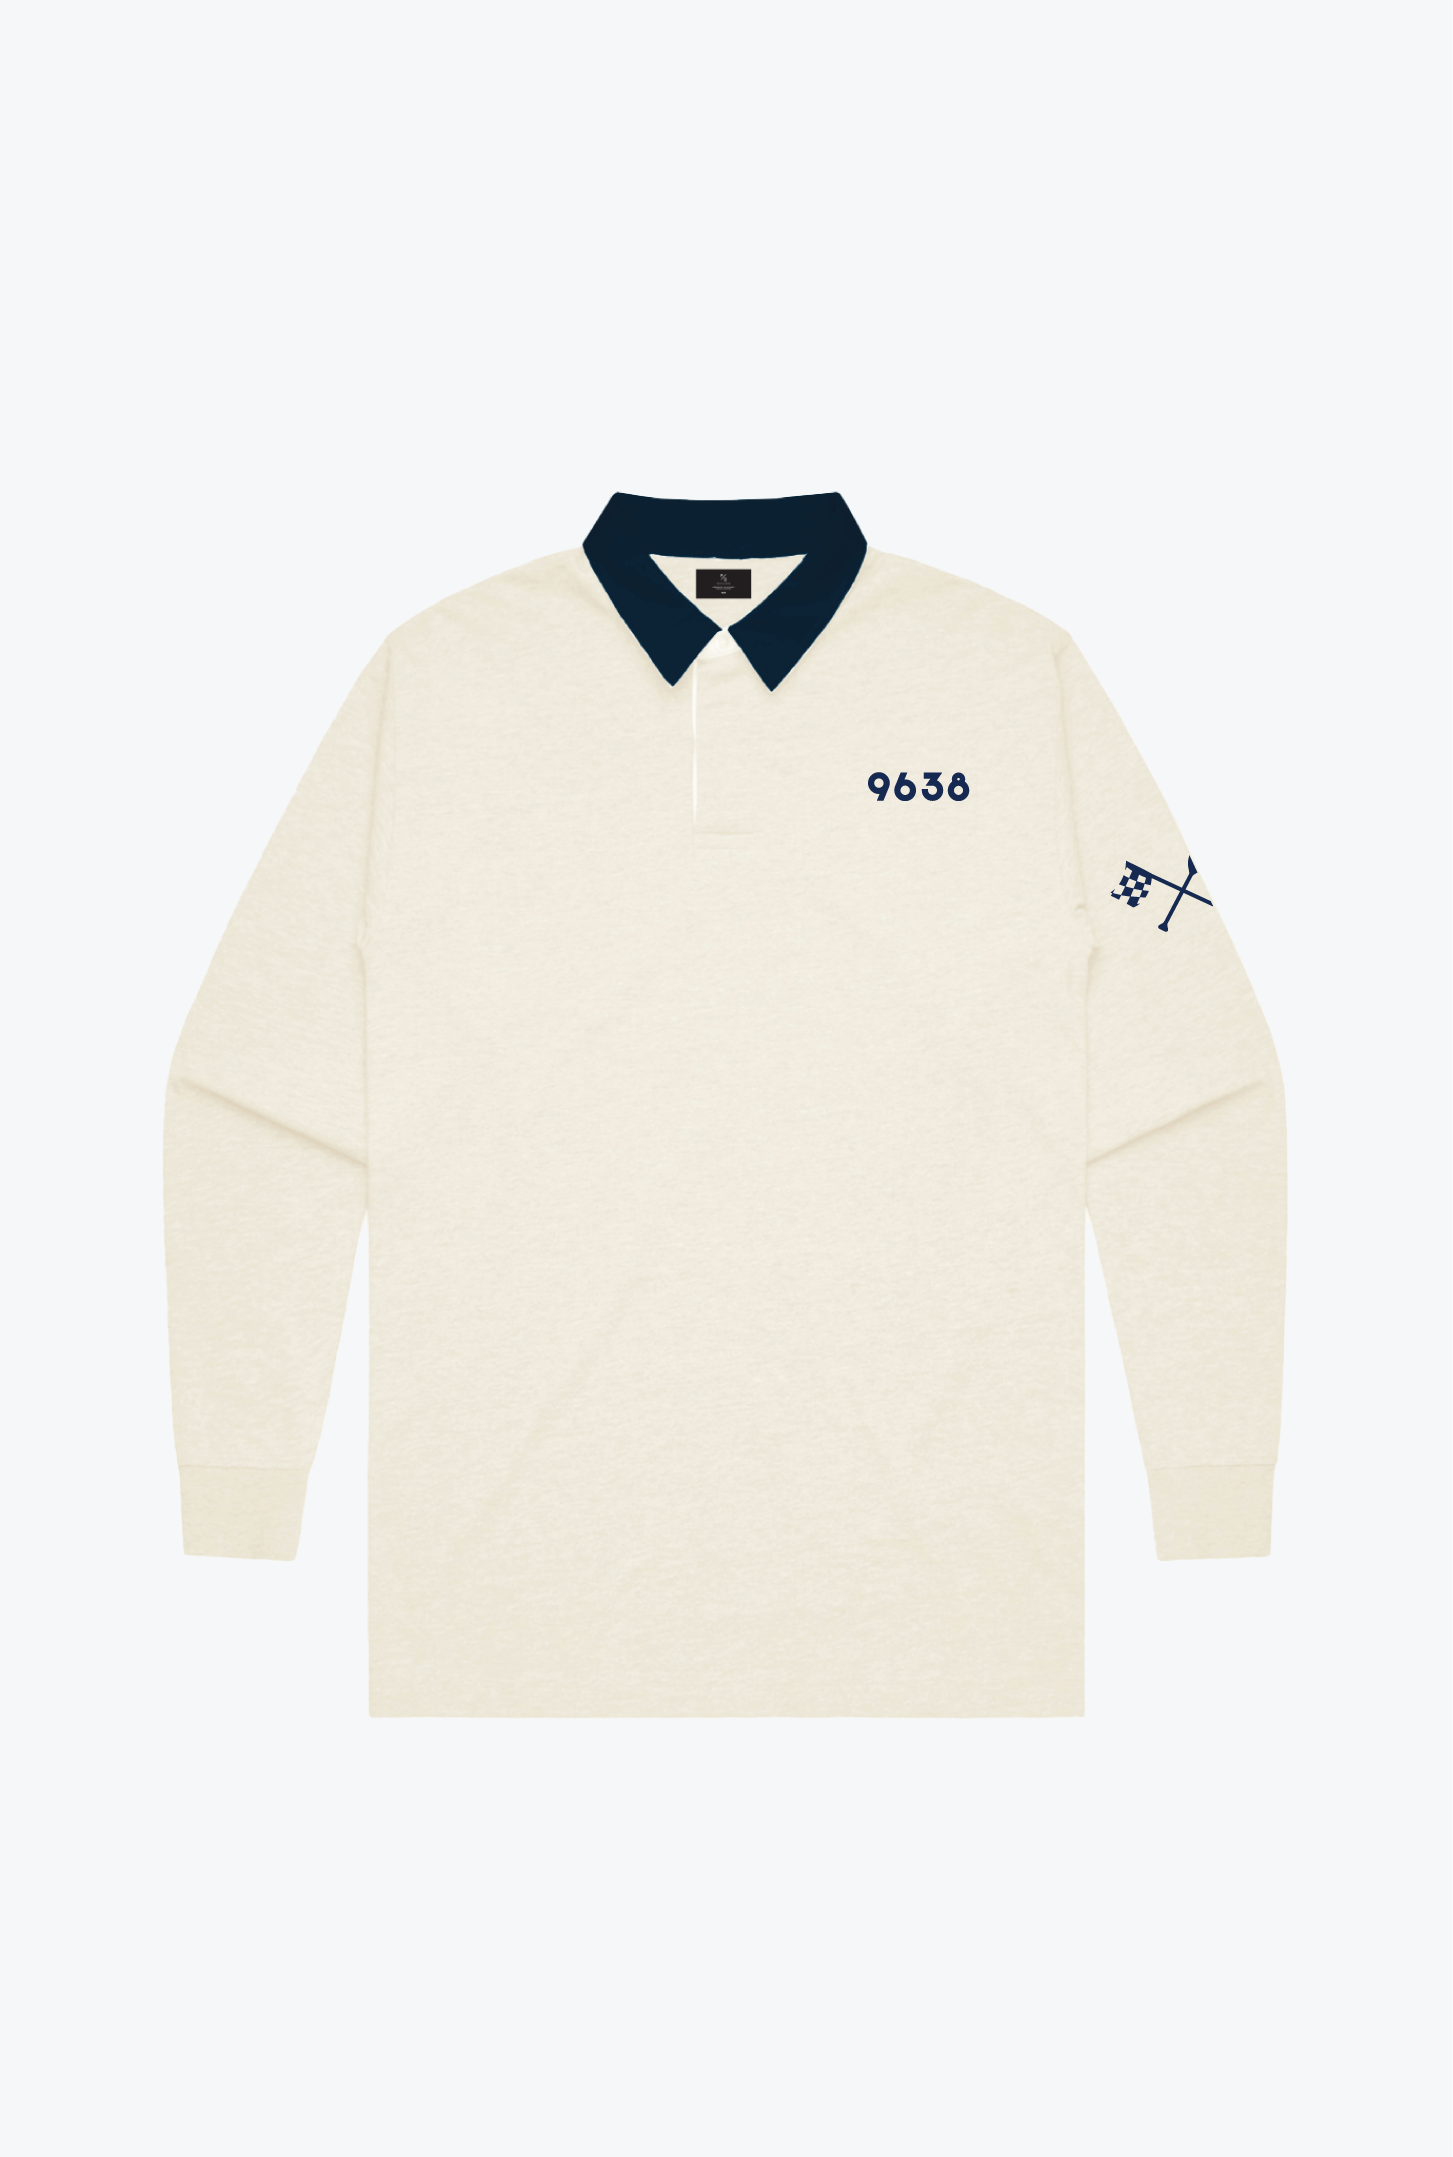 9638 Peace Collective Ivory Polo with navy collar, navy text "9638"